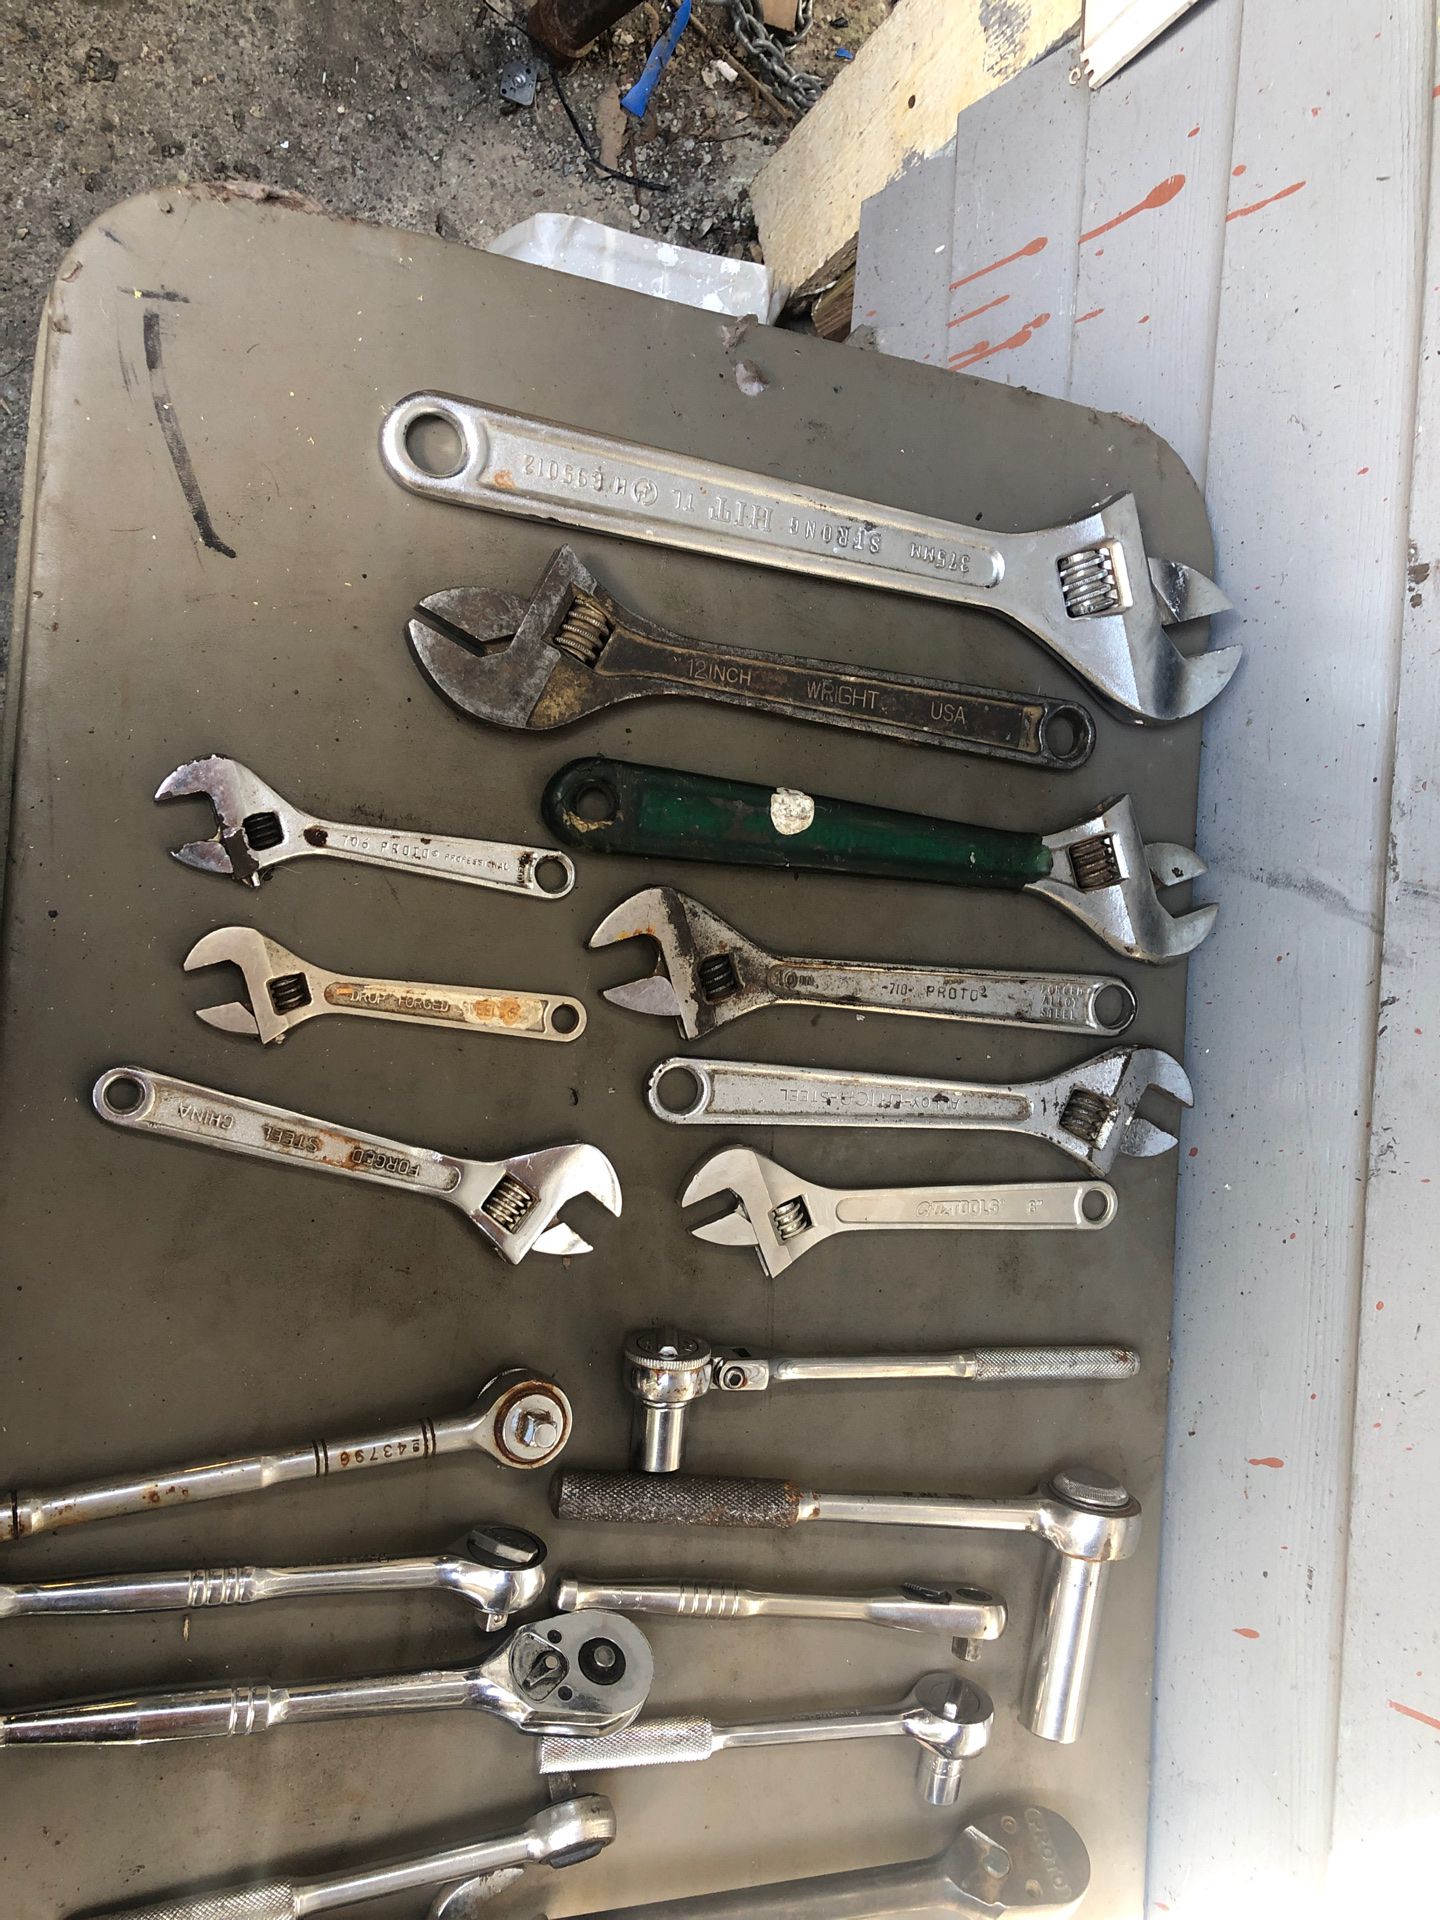 Tools adjustable wrenches ratchet s and wrenches